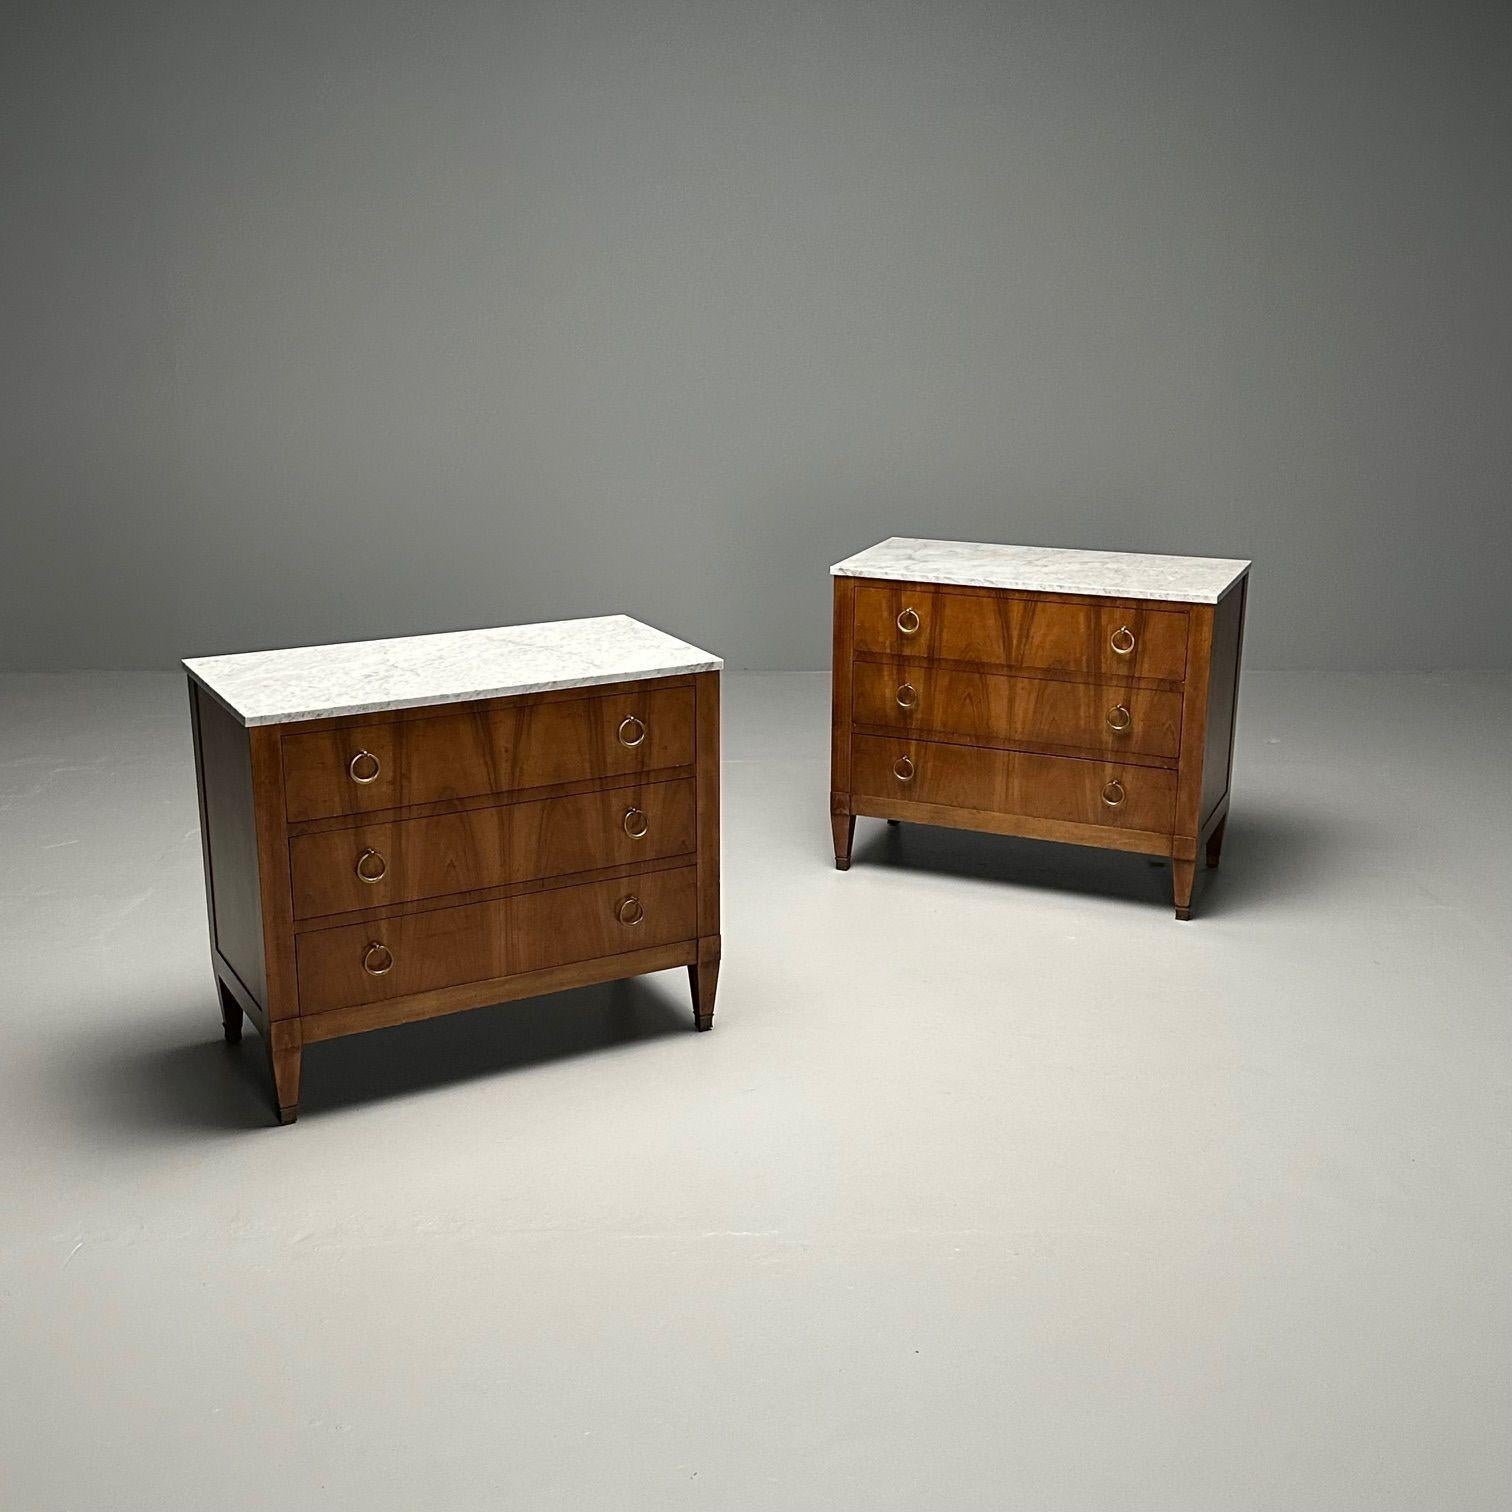 Pair Provincial Baker Furniture Commodes / Nightstands, Marble Top, P.E. Guerin
A custom pair of Baker Furniture Company chests having bespoke later production white and grey marble top. This sleek and stylish pair of commodes each have three by